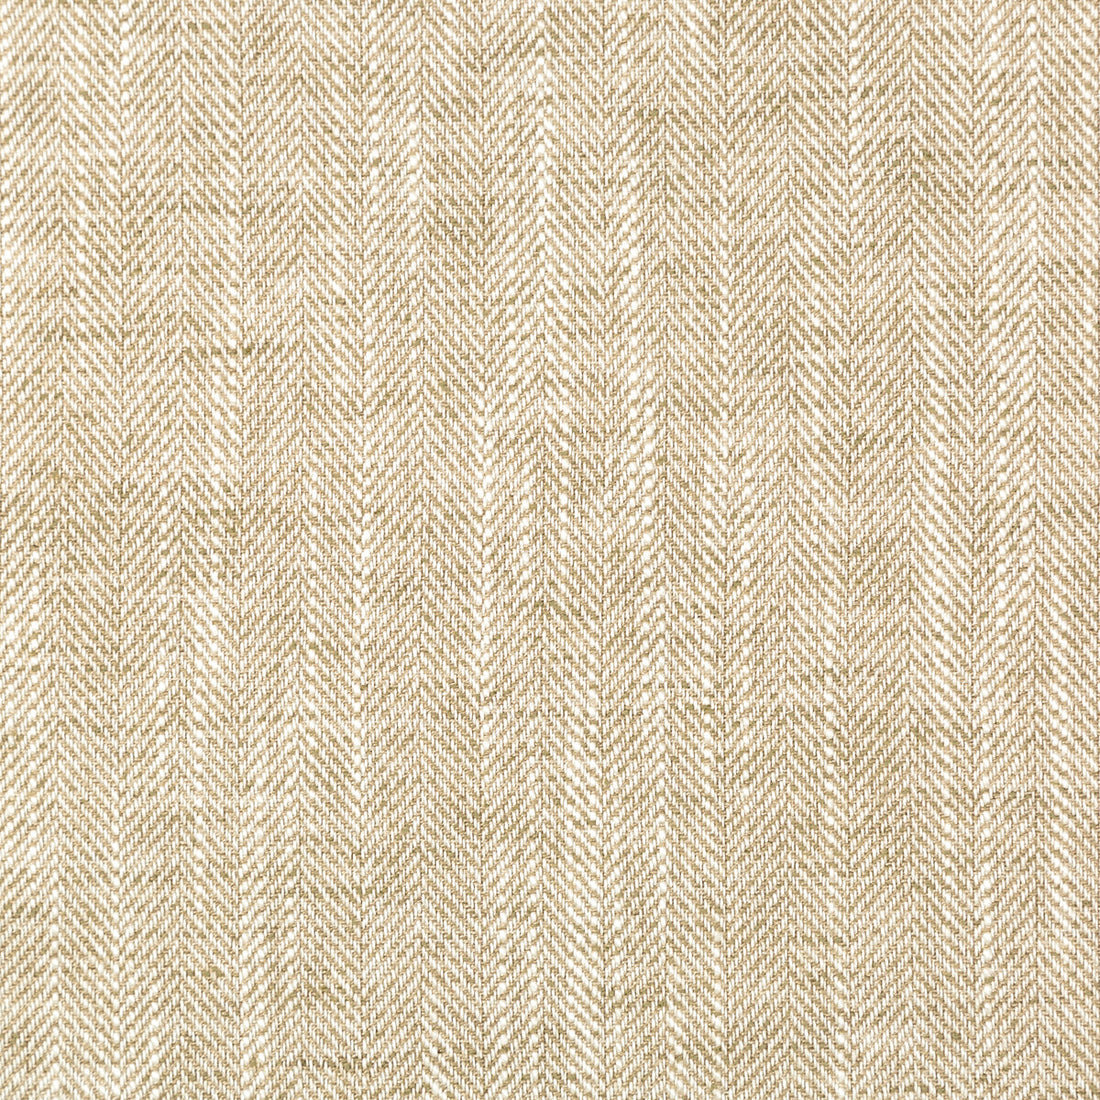 Mataru fabric in rattan color - pattern 35763.16.0 - by Kravet Basics in the Ceylon collection